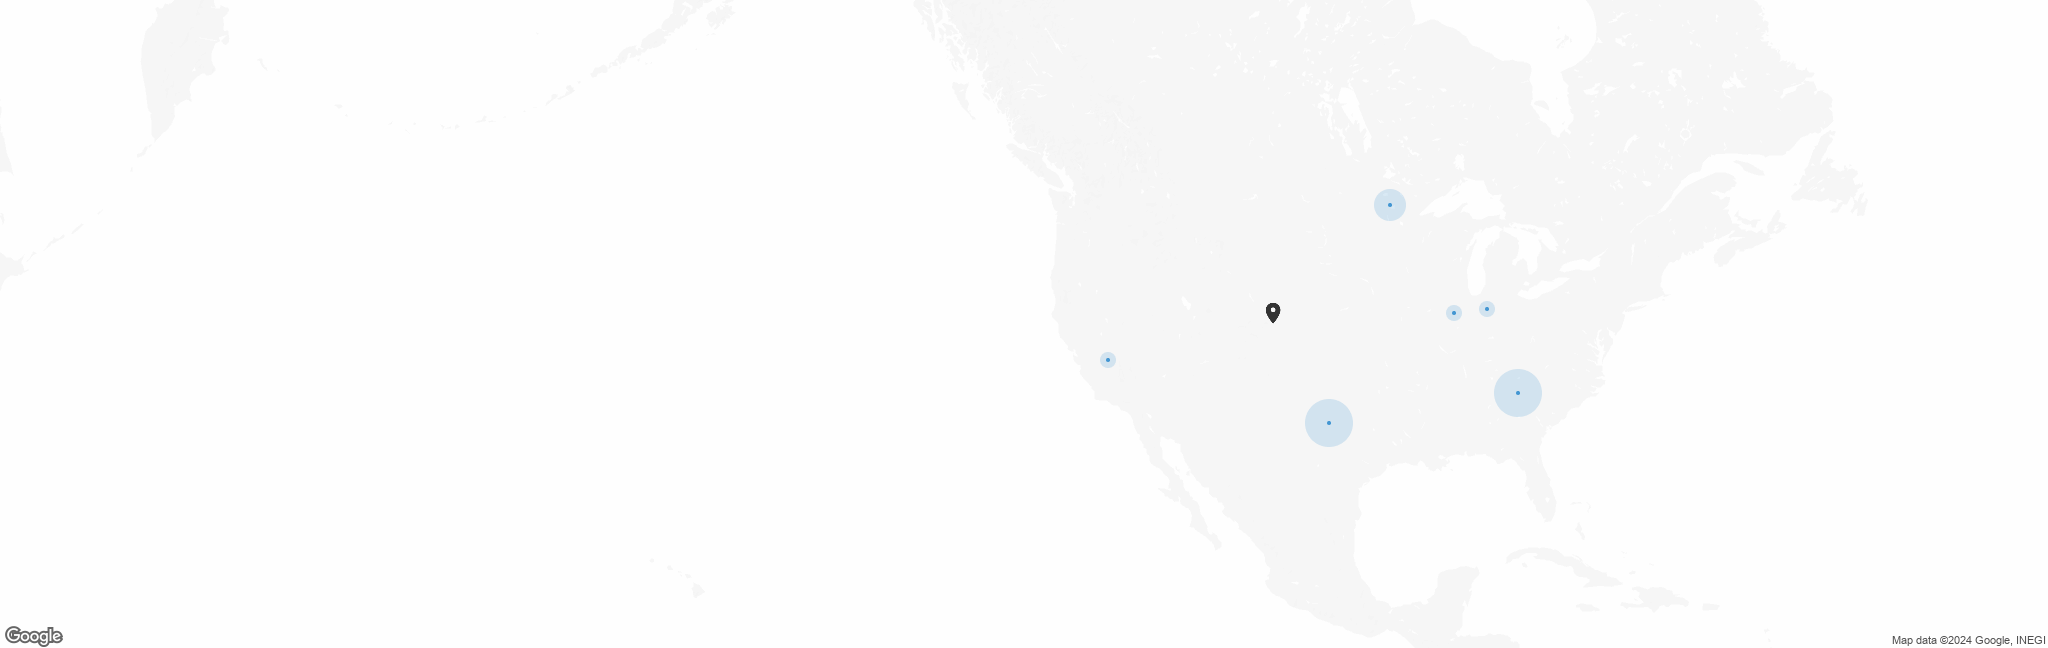 Map of US with pin of Imagine Better Inc. location